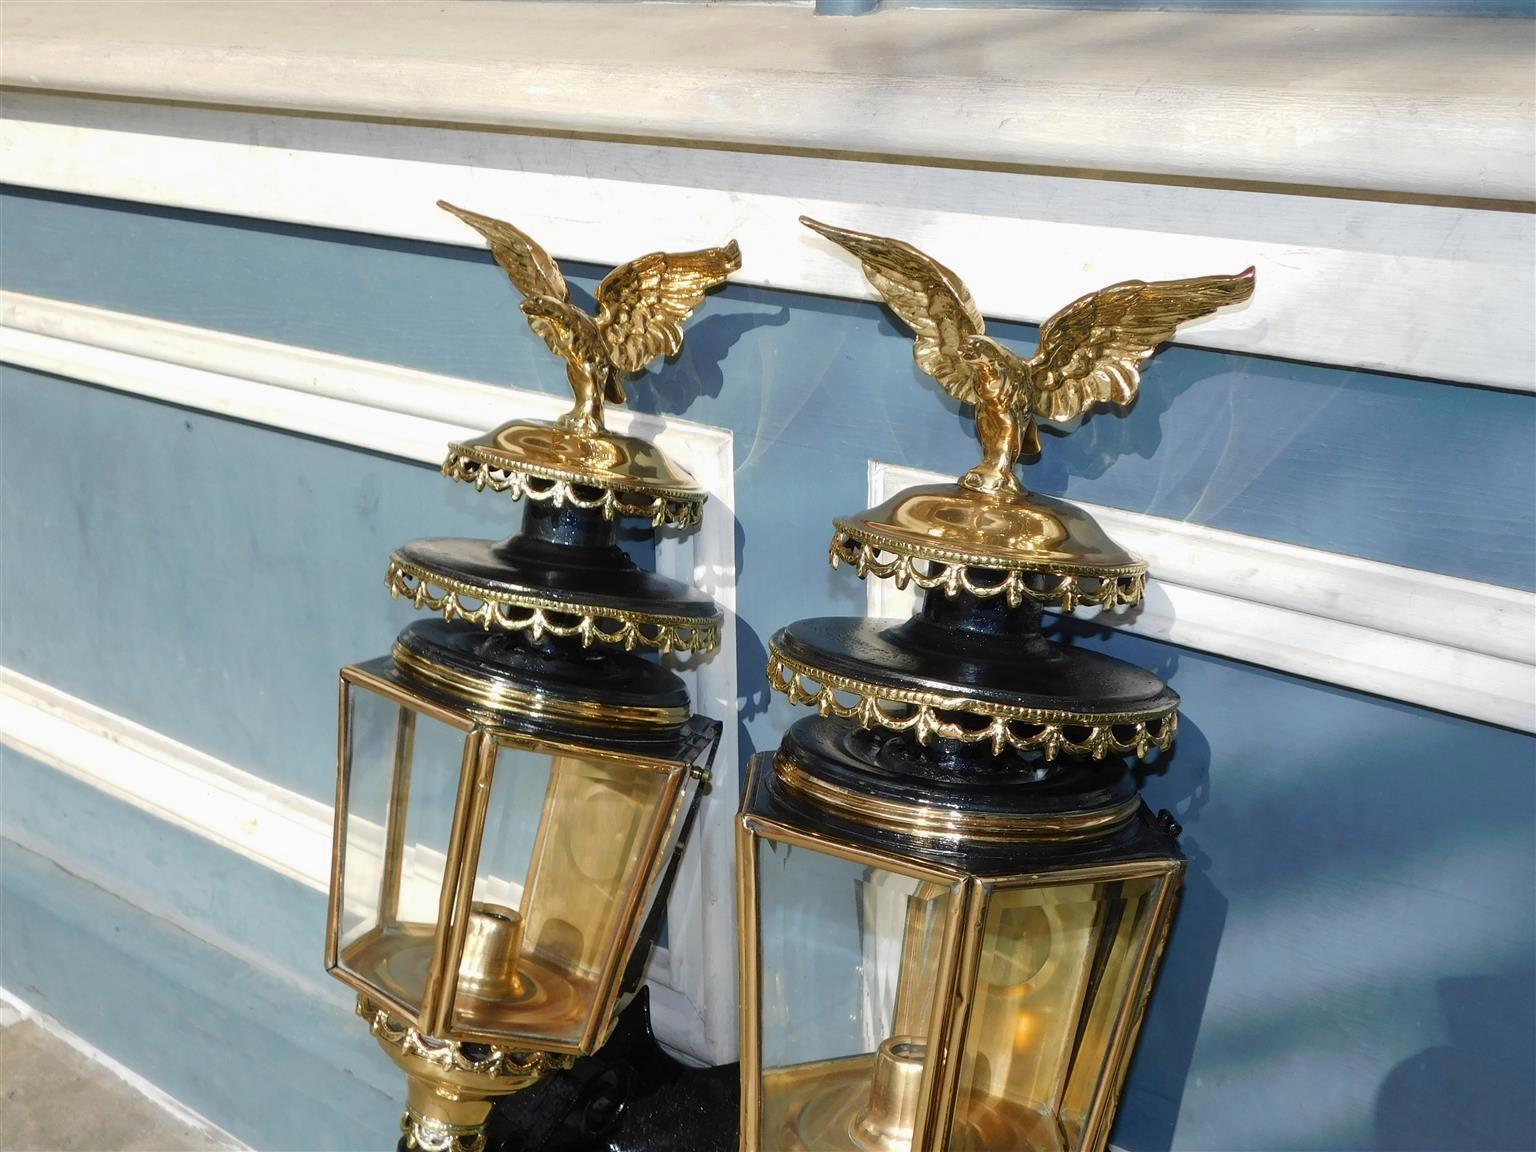 Mid-19th Century Pair of American Brass and Iron Eagle Finial Beaded Swag Coach Lanterns, C. 1850